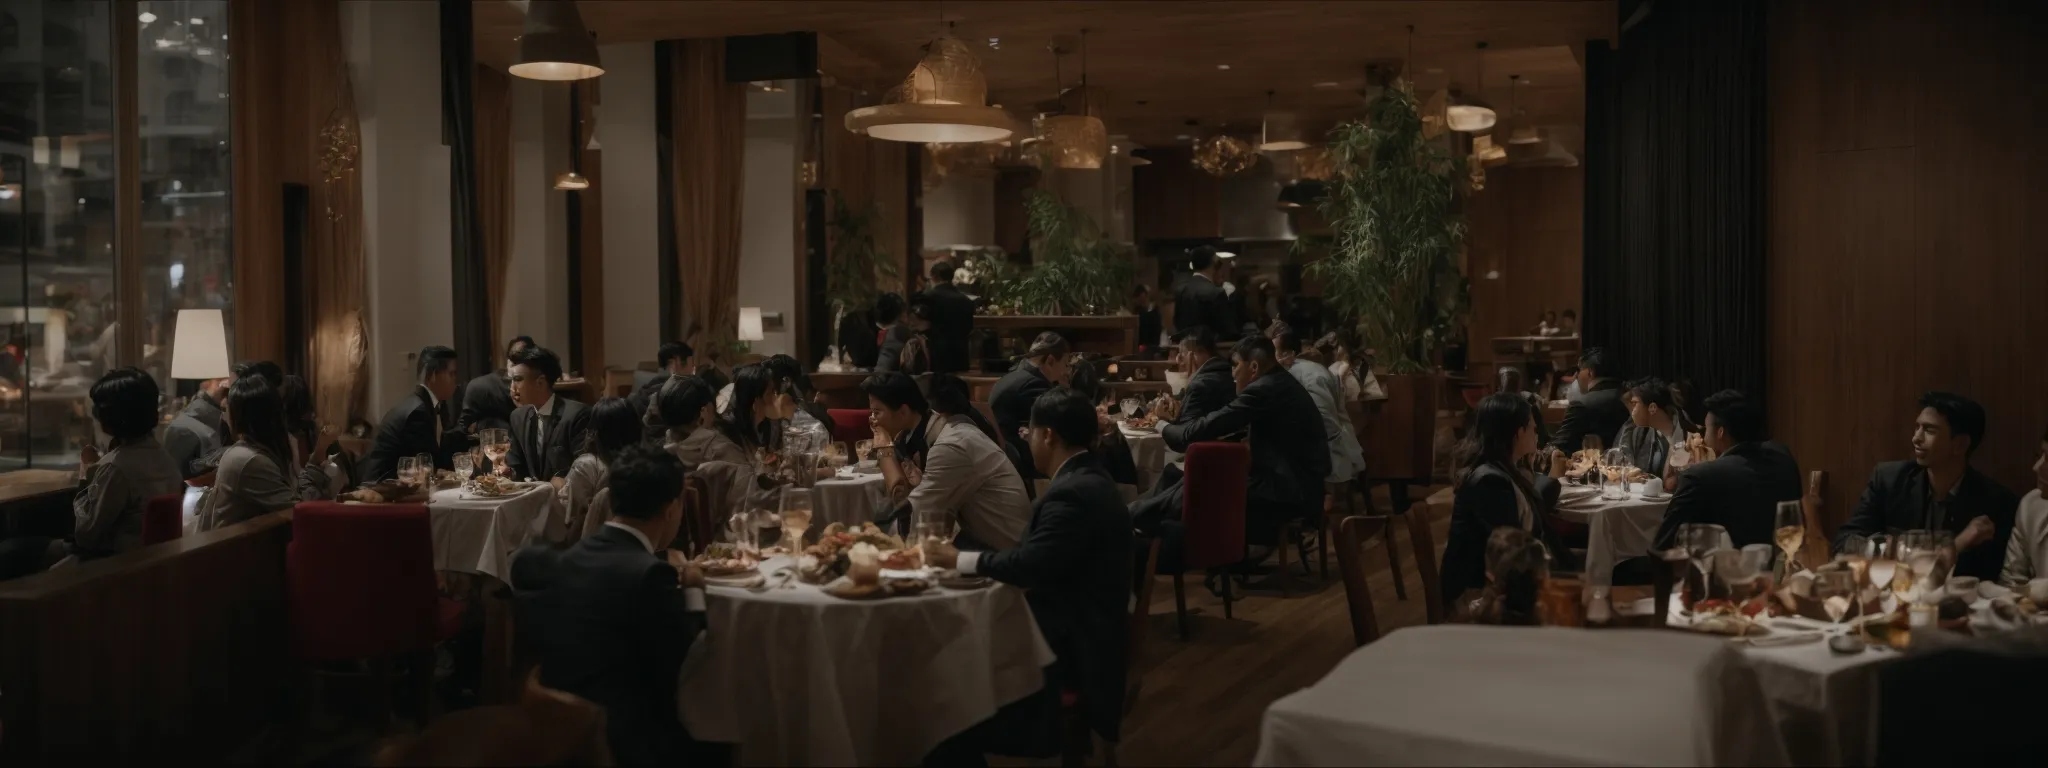 a bustling restaurant interior with guests enjoying their meals at various tables.